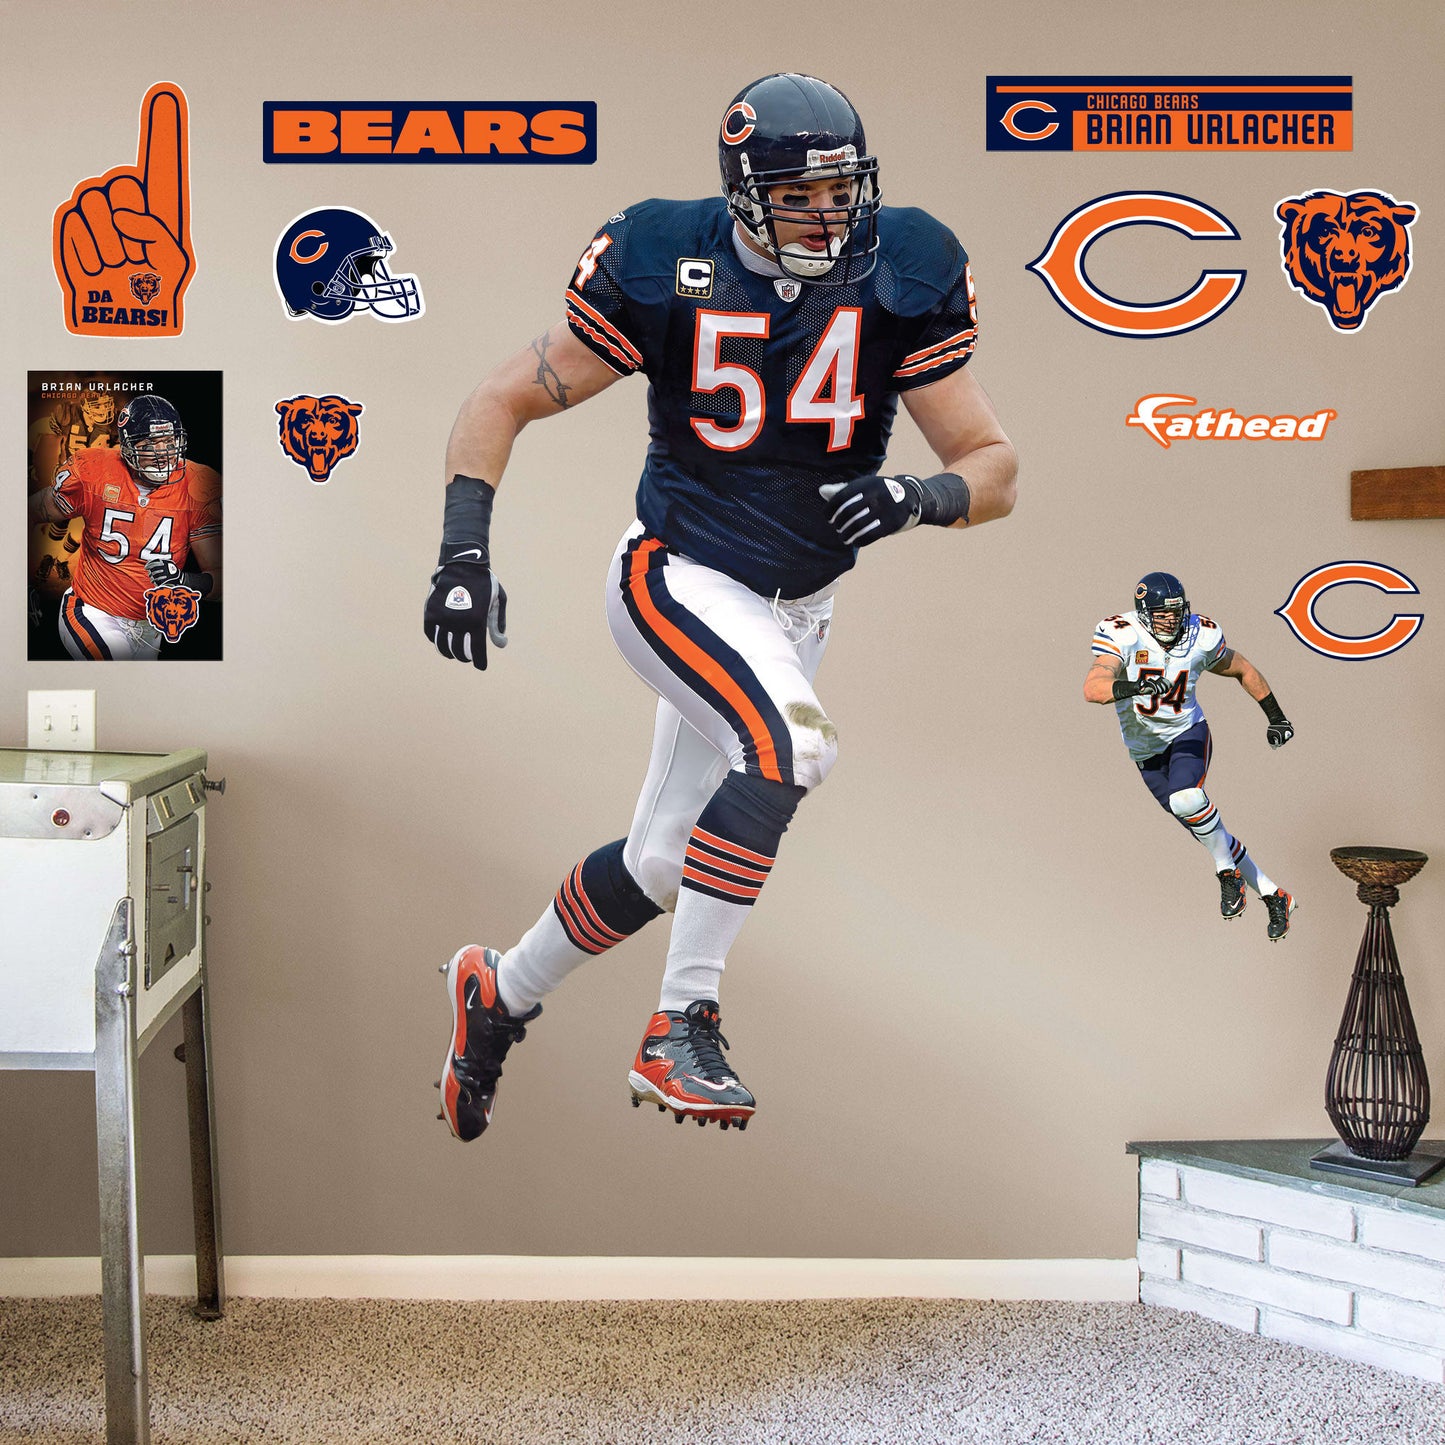 Life-Size Athlete + 11 Decals (43"W x 78"H) For 13 years, the Chicago Bears watched #54 earn his place as one of the Top 100 Bears of All time. Rep the navy blue and burnt orange with a high-grade vinyl decal of Da Bears legend Brian Urlacher. Removable, reusable, and tear-resistant, this Hall of Famer is great for bedrooms, man caves, or even as a temporary party decoration. Bear down, Chicago Bears!